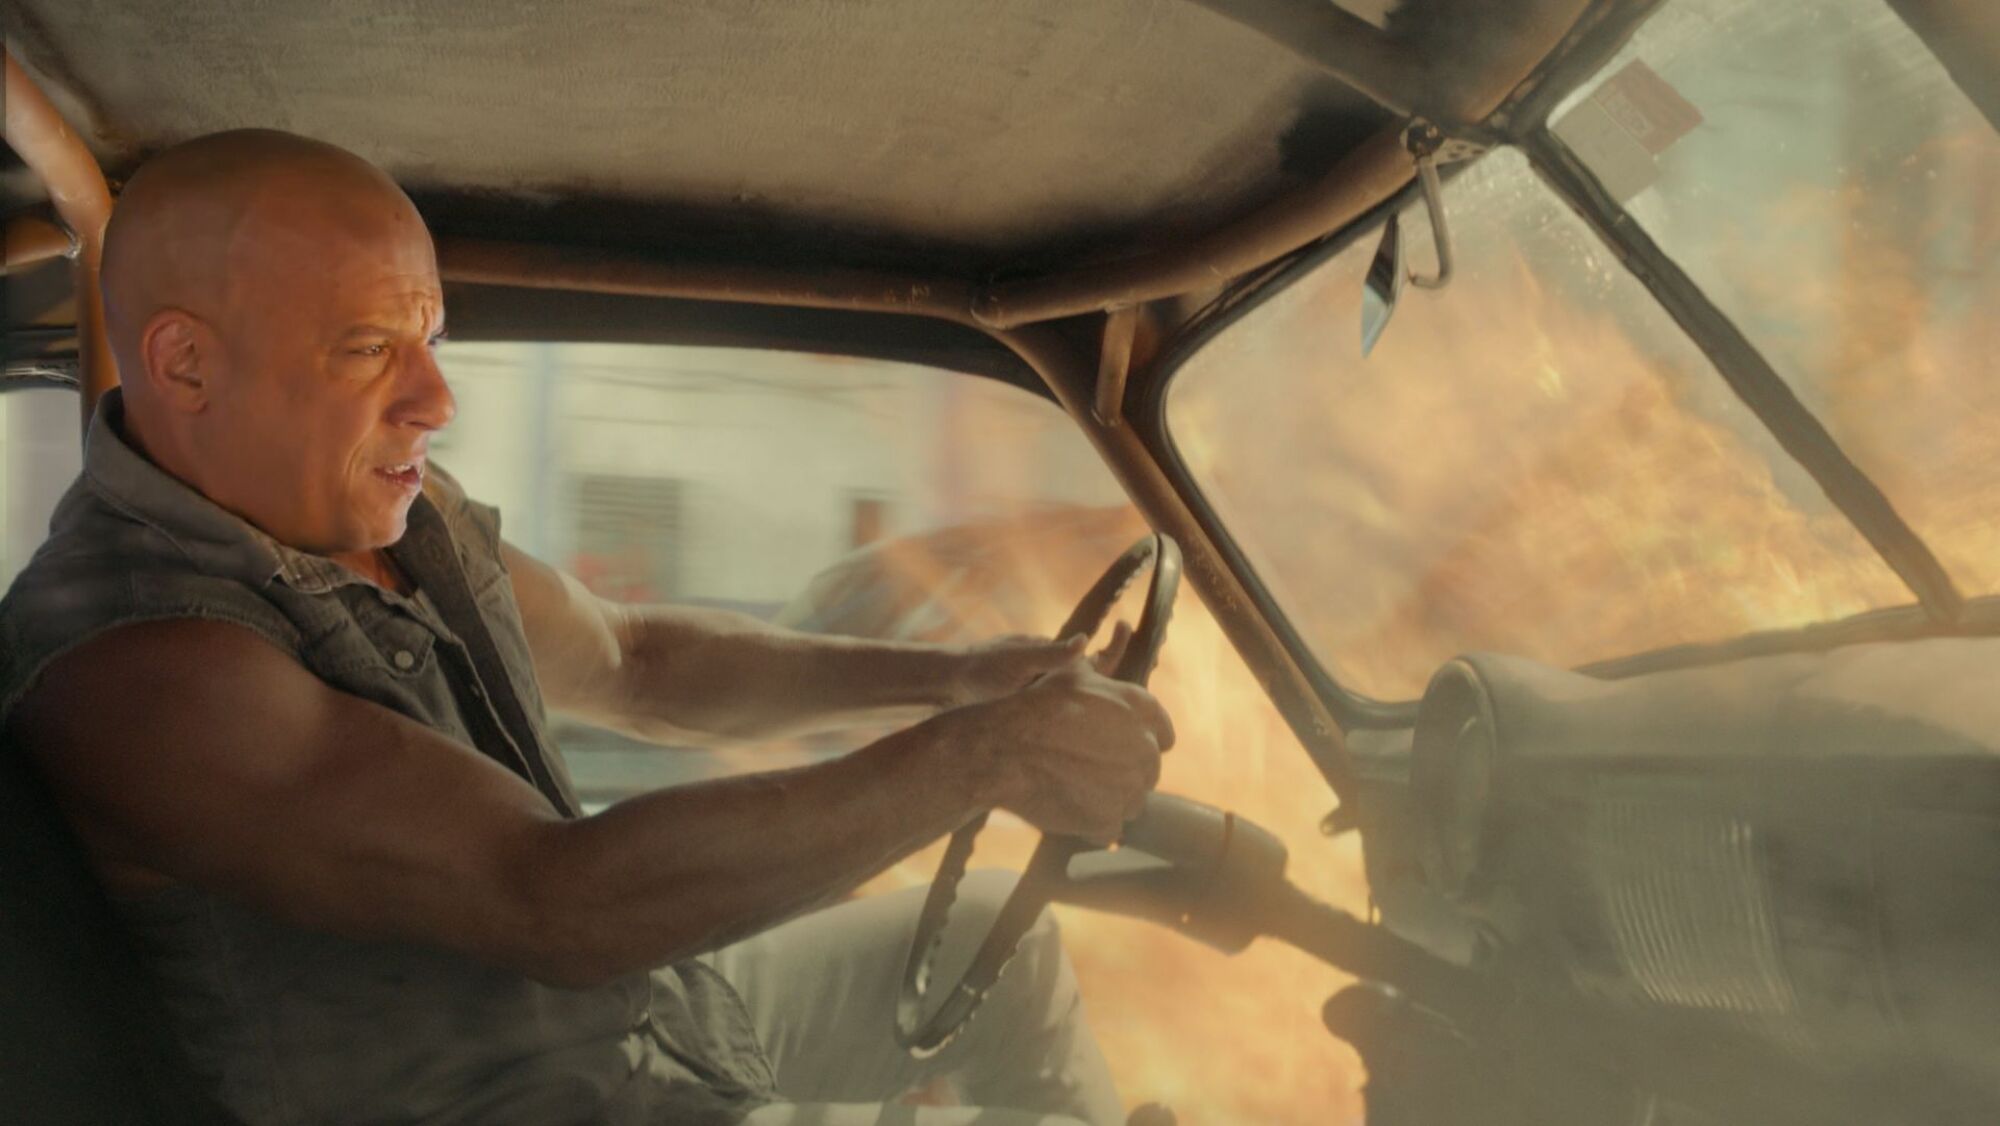 Vin Diesel drives a car on fire in "The Fate of the Furious"